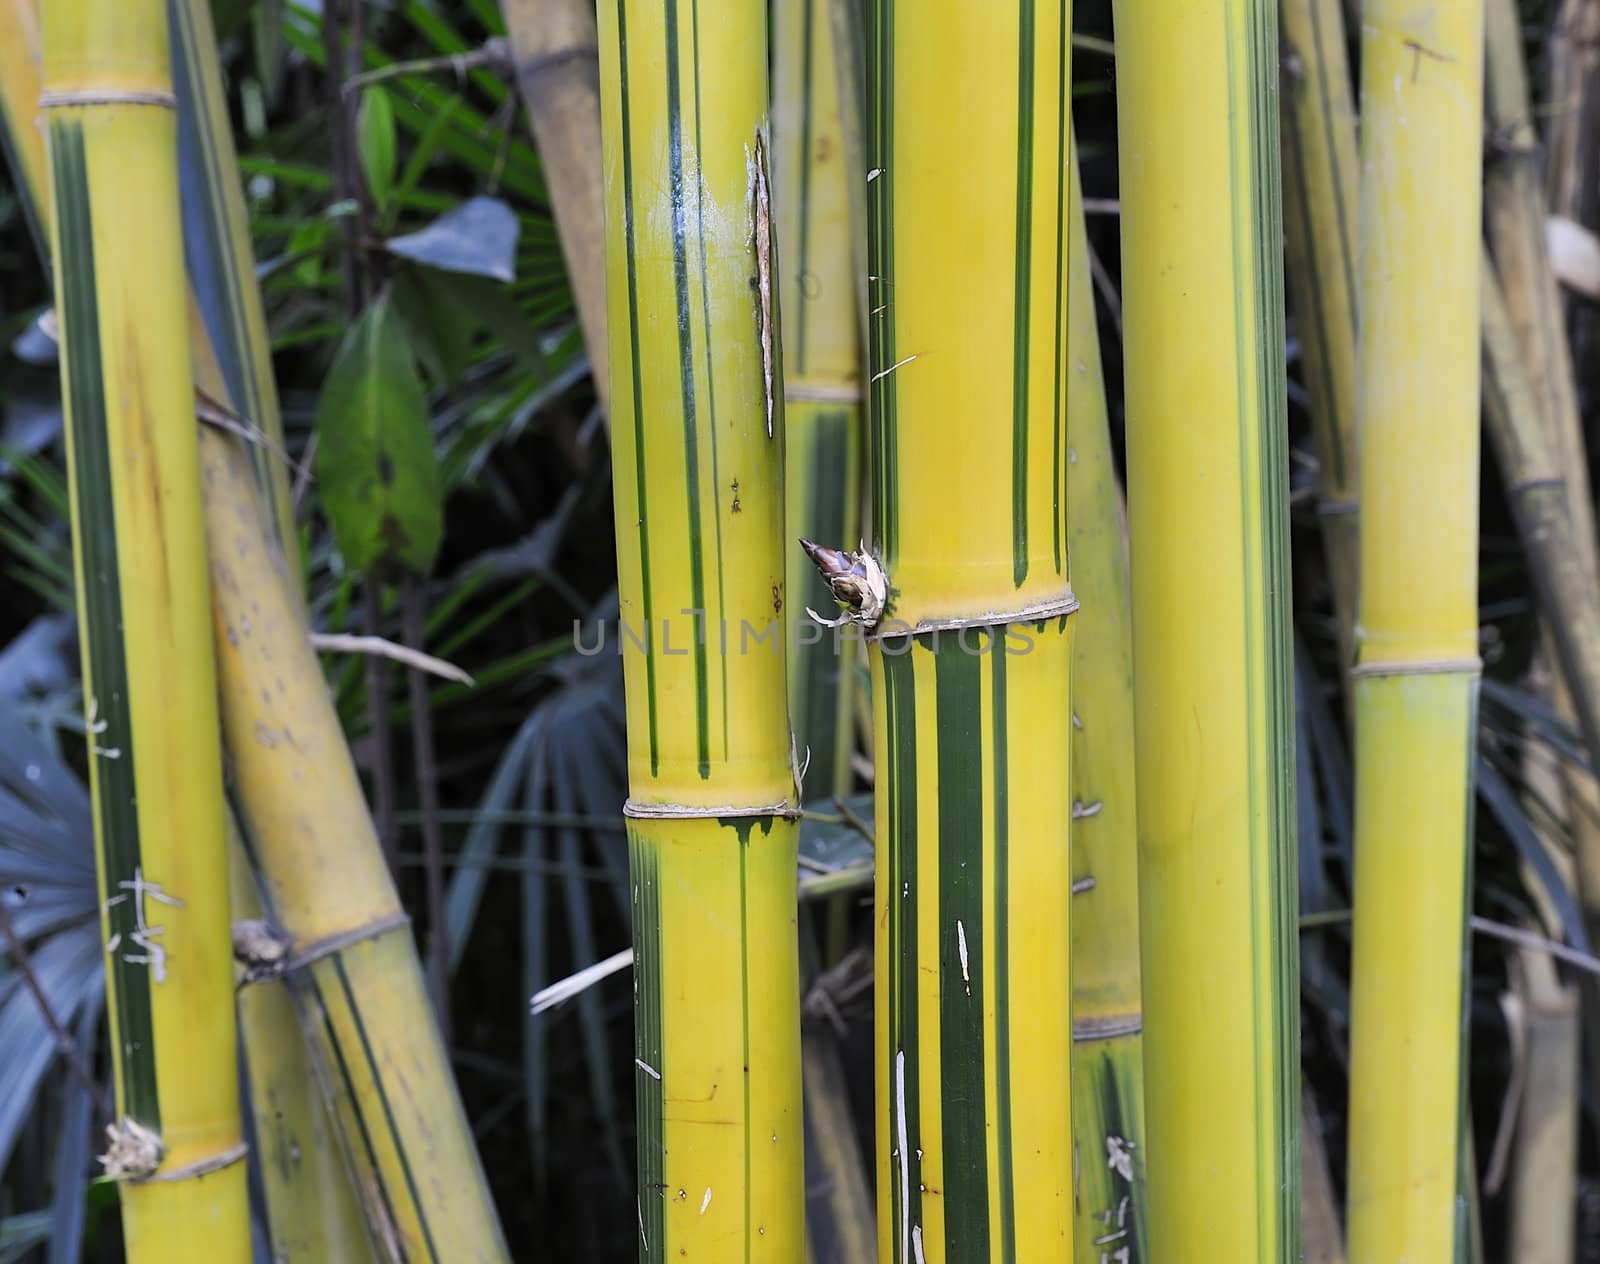 the yellow bamboo groves